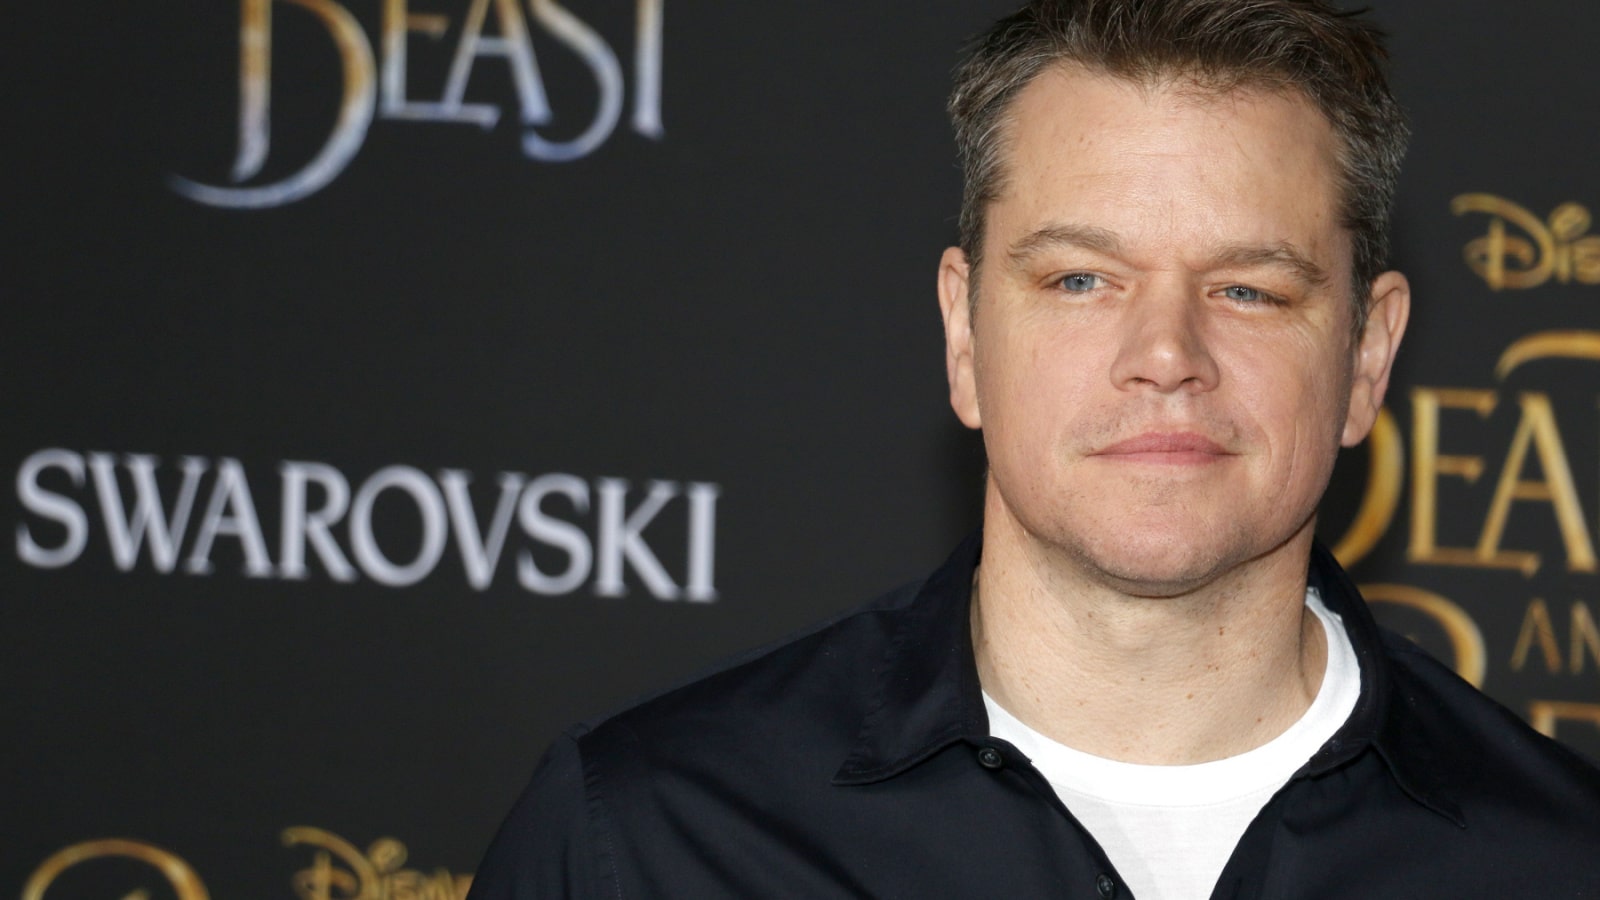 Matt Damon at the Los Angeles premiere of 'Beauty And The Beast' held at the El Capitan Theatre in Hollywood, USA on March 2, 2017.